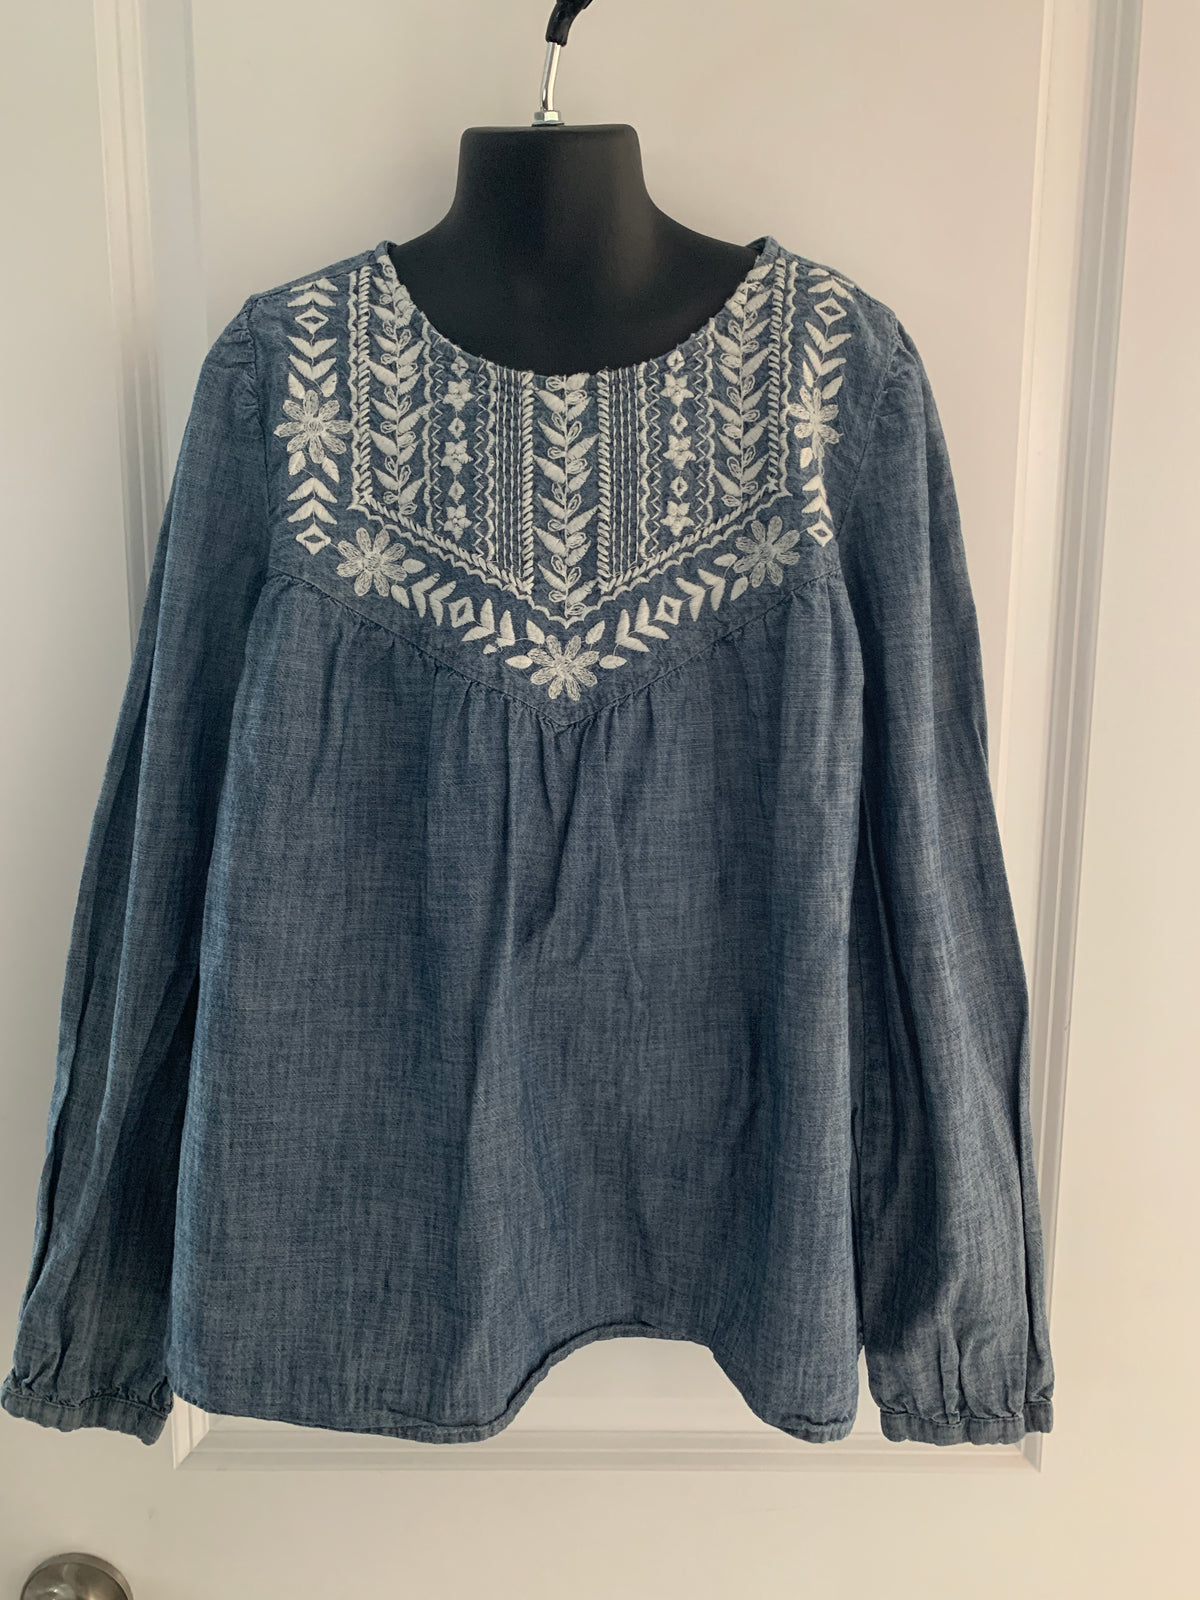 Pullover Blouse/Top (Girls Size 12)